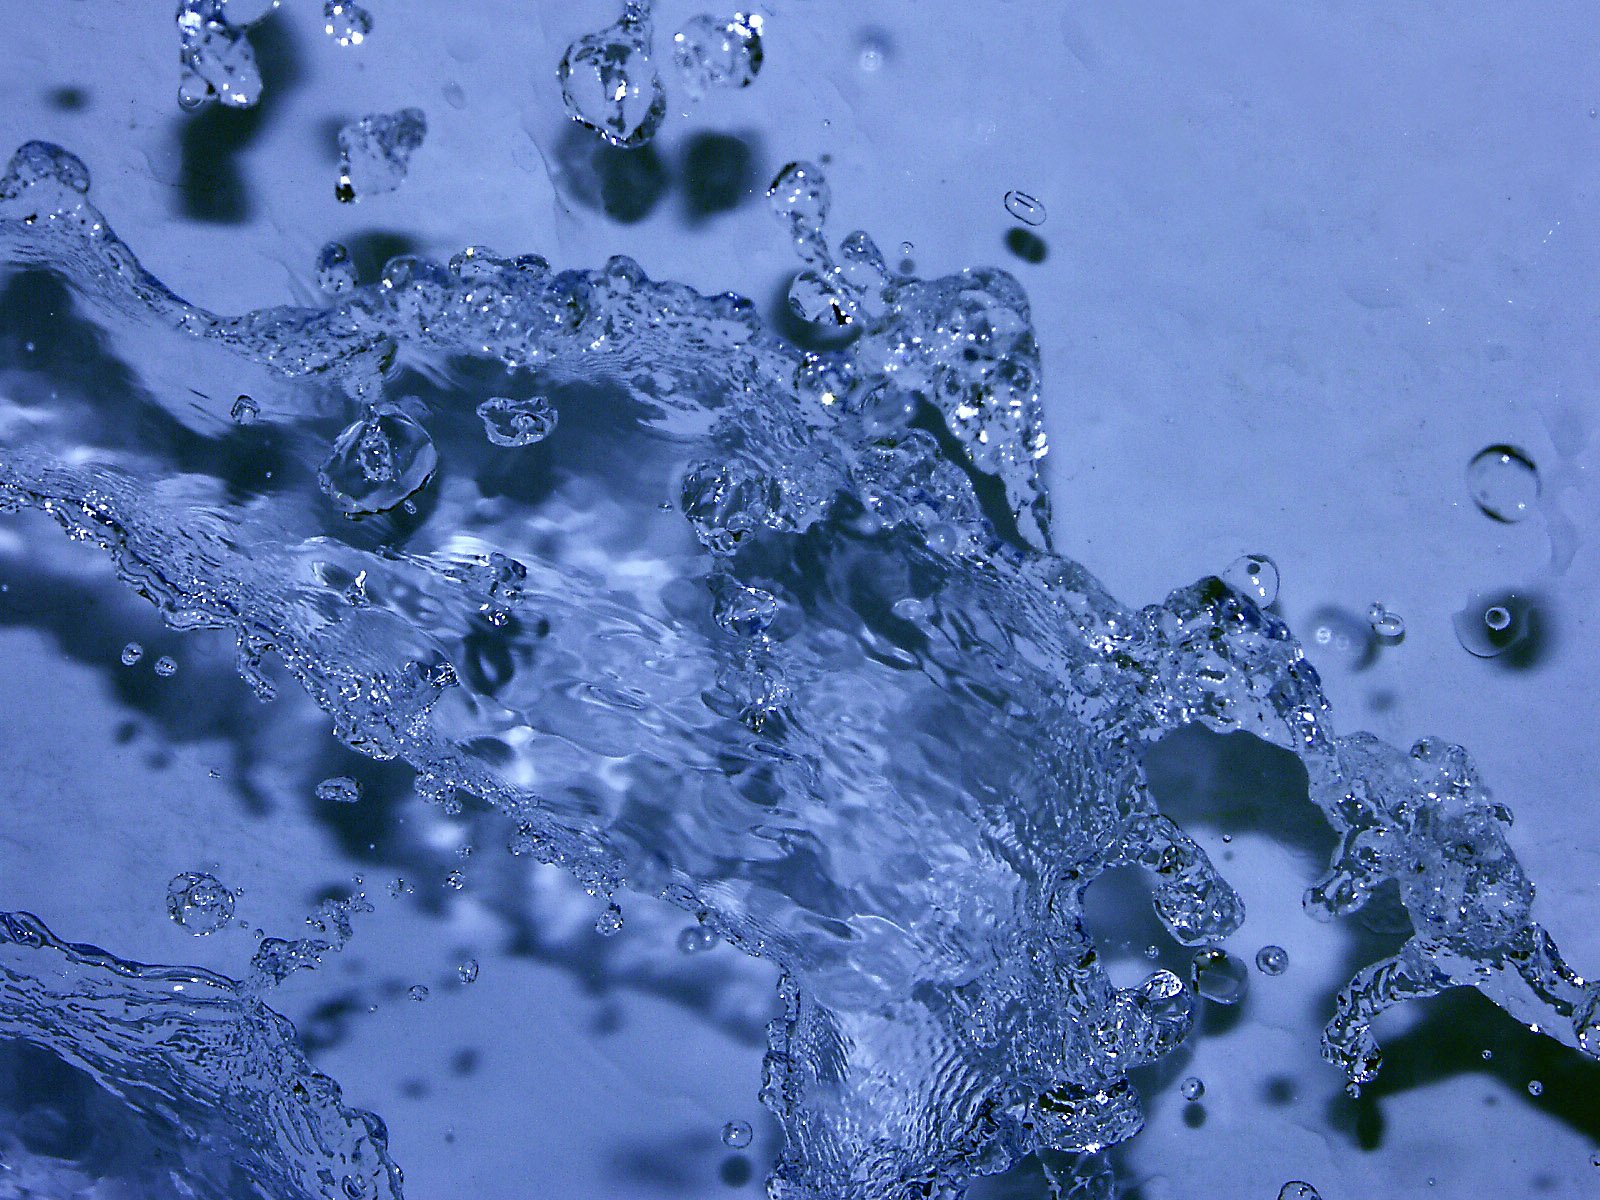 close up view of water splashing in the sink